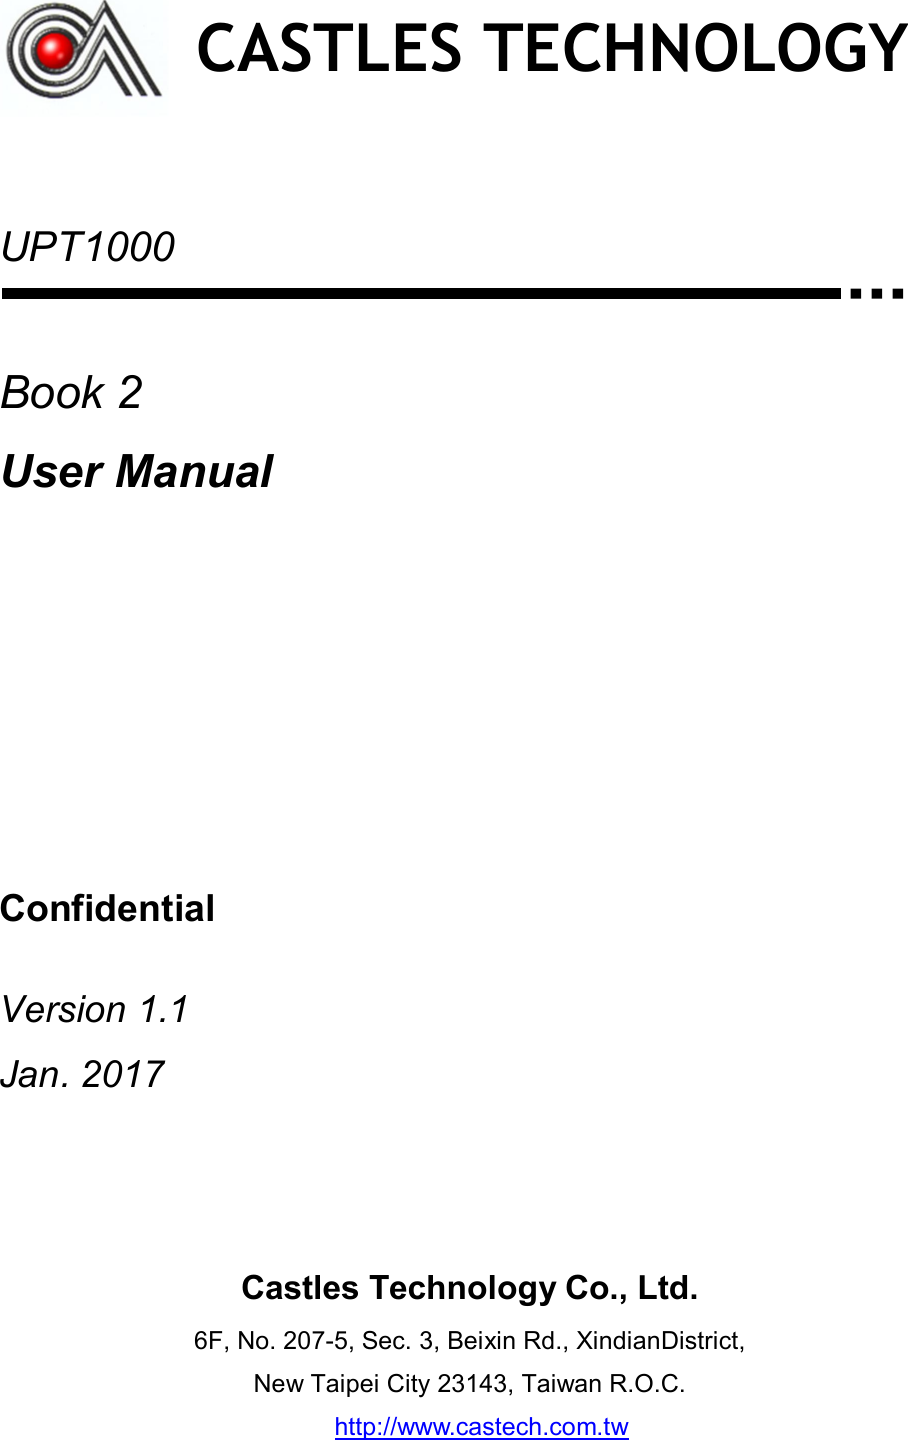     UPT1000    Book 2 User Manual       Confidential  Version 1.1 Jan. 2017      CASTLES TECHNOLOGY Castles Technology Co., Ltd. 6F, No. 207-5, Sec. 3, Beixin Rd., XindianDistrict, New Taipei City 23143, Taiwan R.O.C. http://www.castech.com.tw  